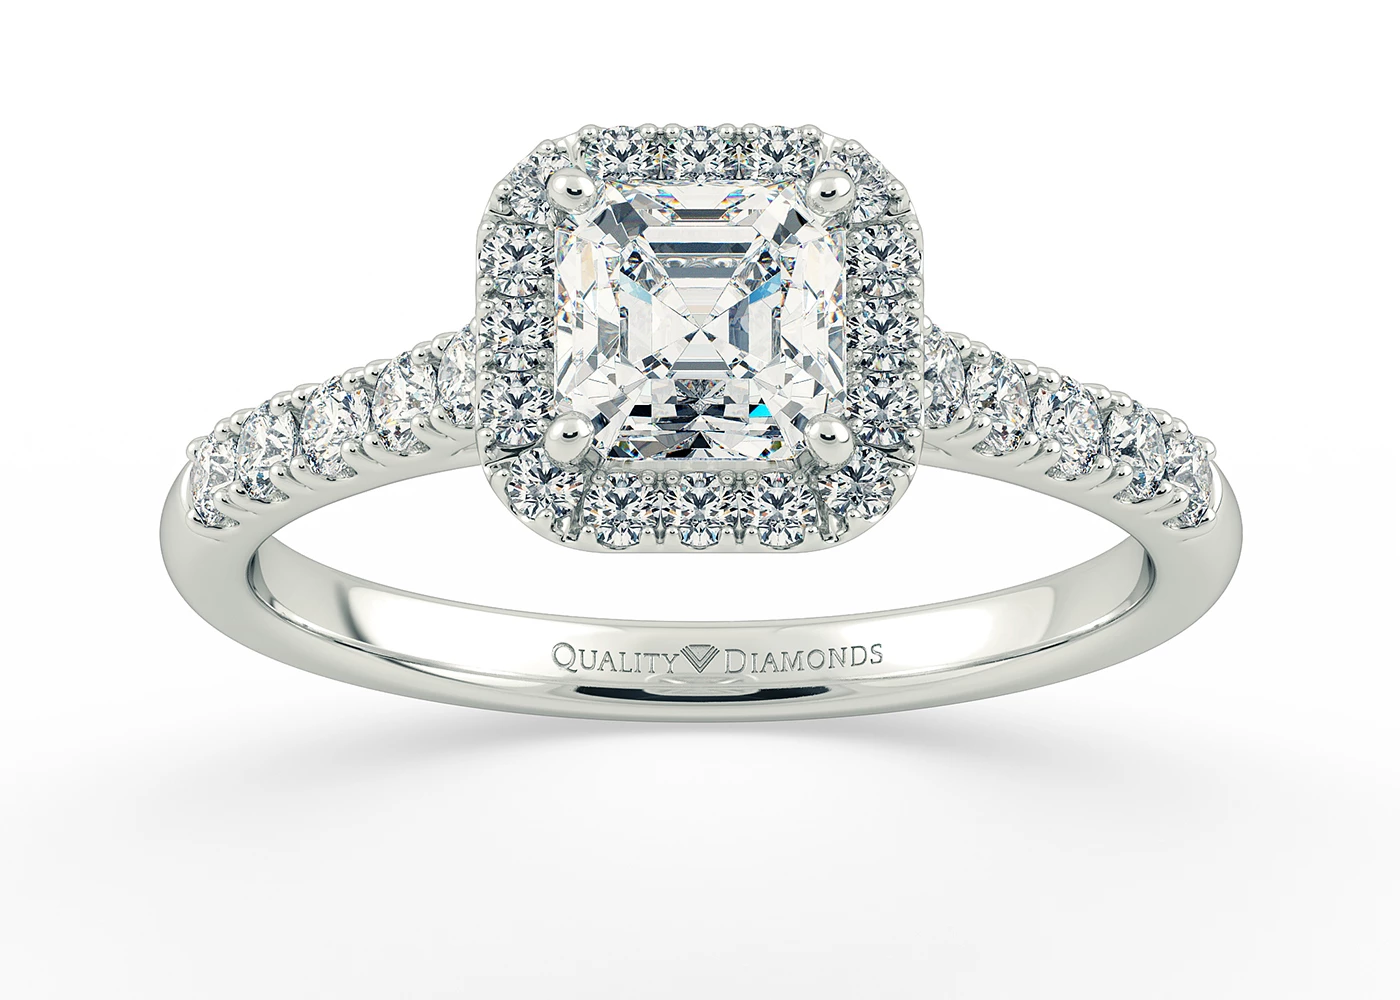 Two Carat Halo Asscher Diamond Ring in 18K White Gold